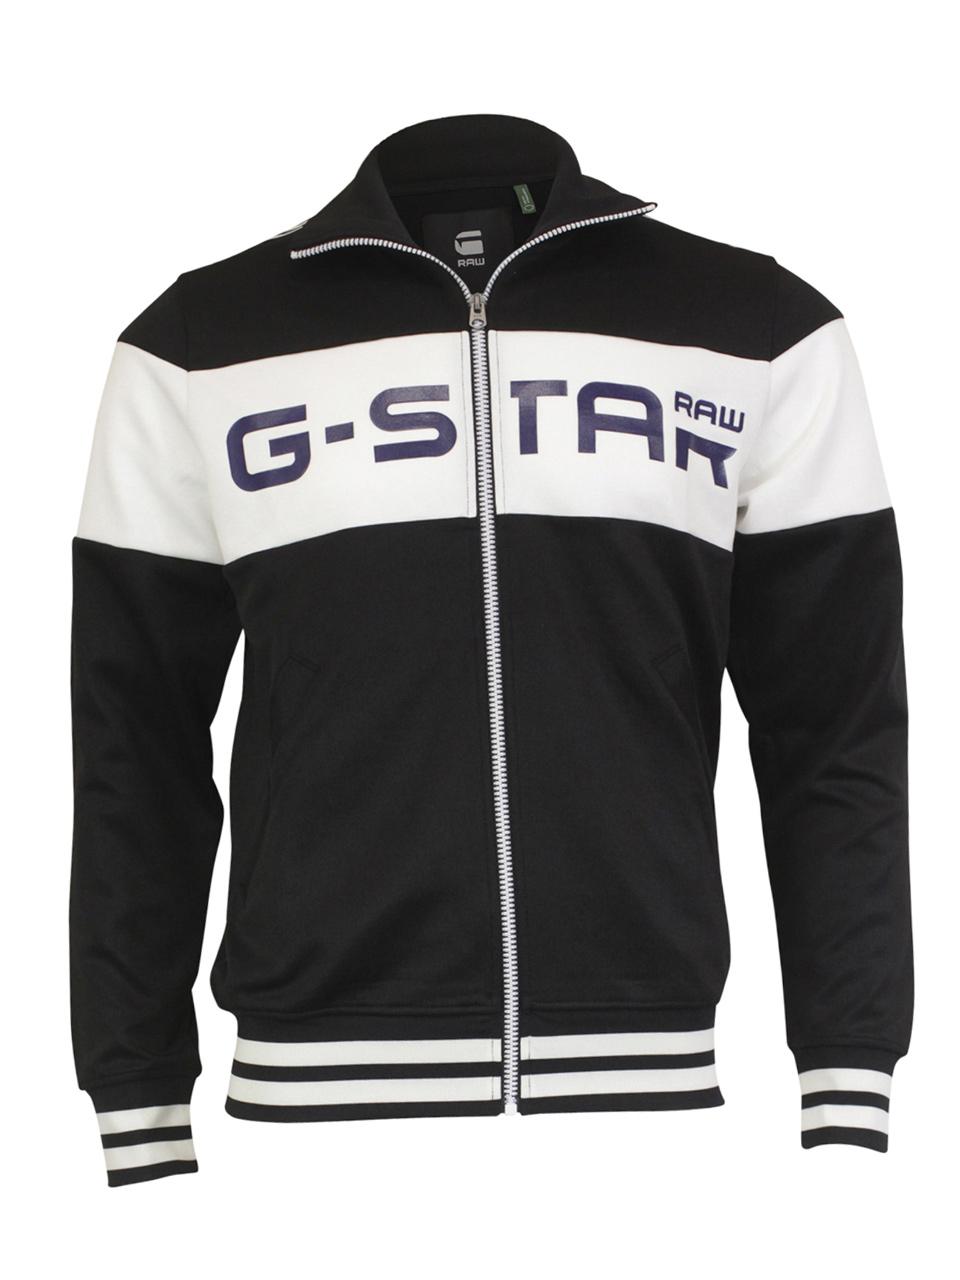 discount g star clothing